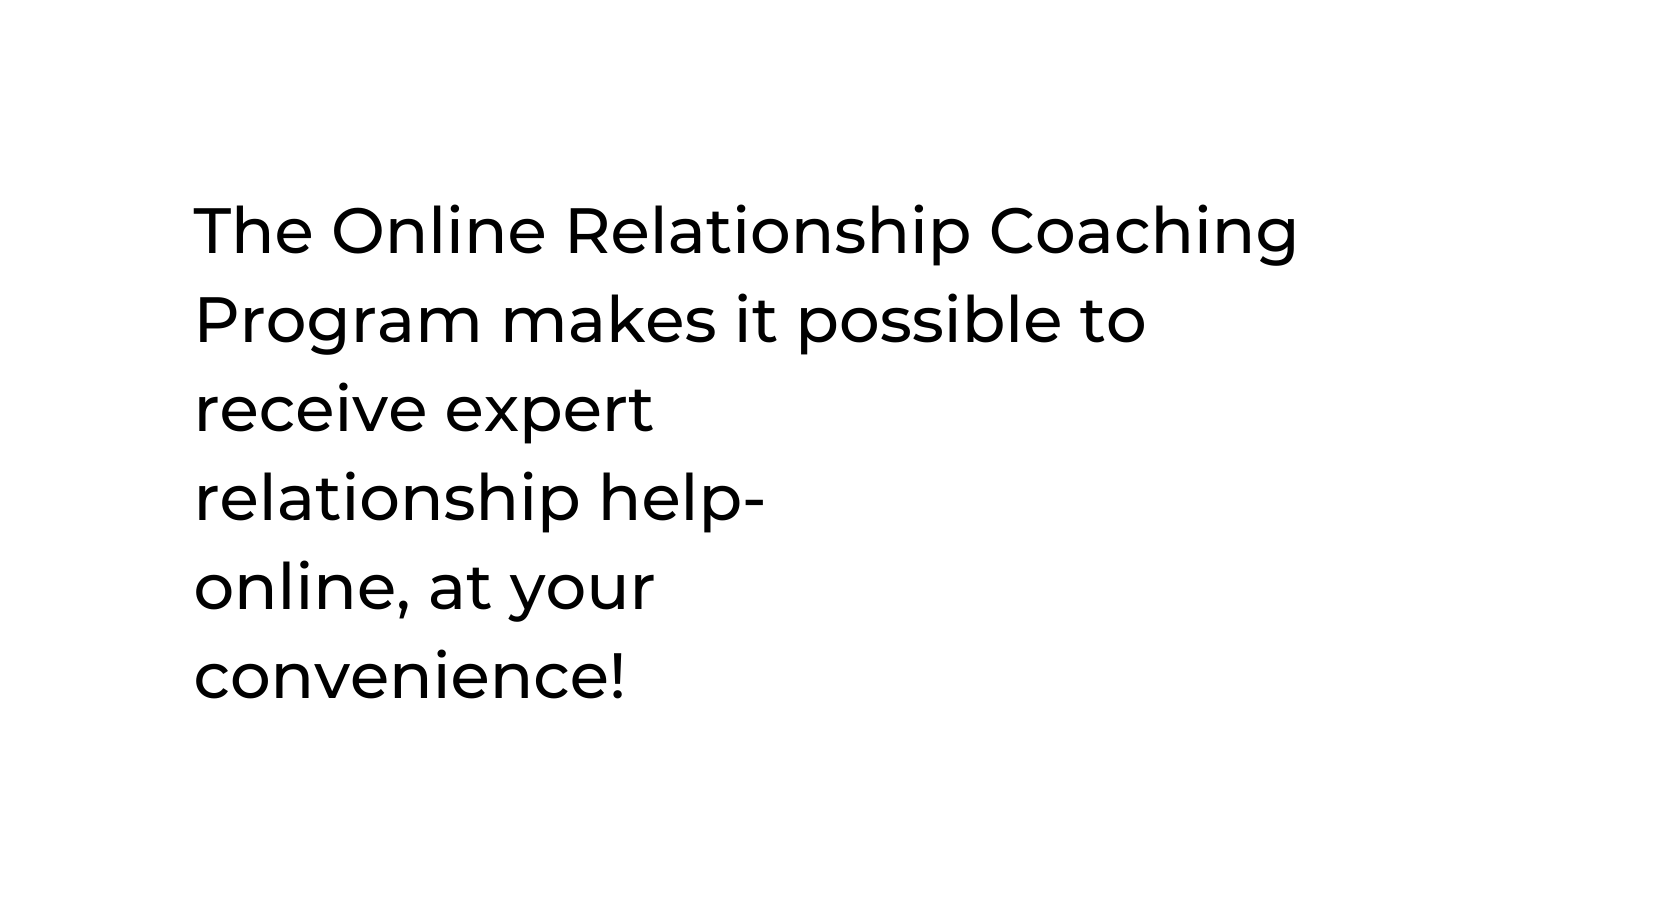 The Online Relationship Coaching Program makes it possible to receive expert relationship help online at your convenience